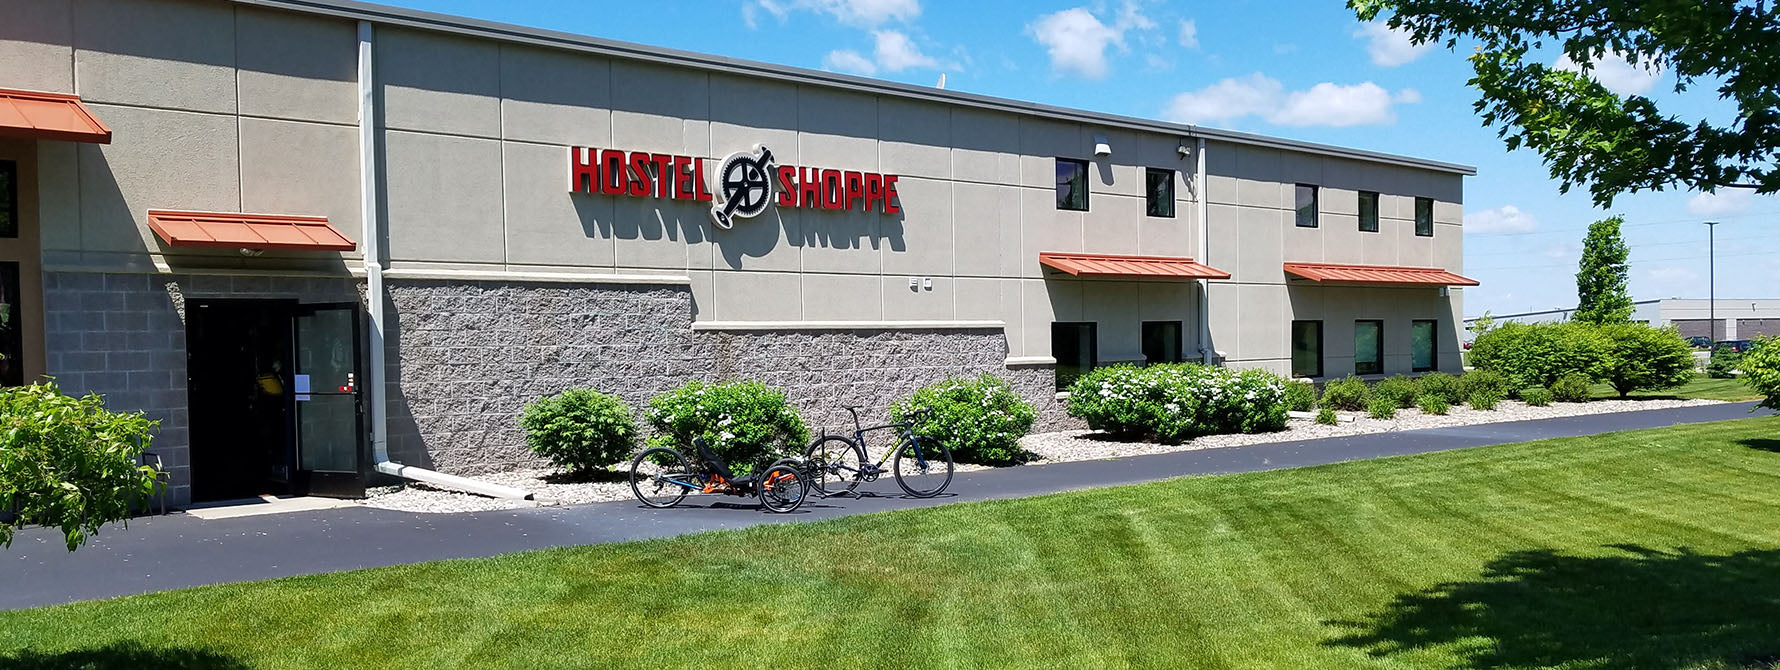 A summer photo of the Hostel Shoppe building with a recumbent trike and a bike in the foreground on the bike path.